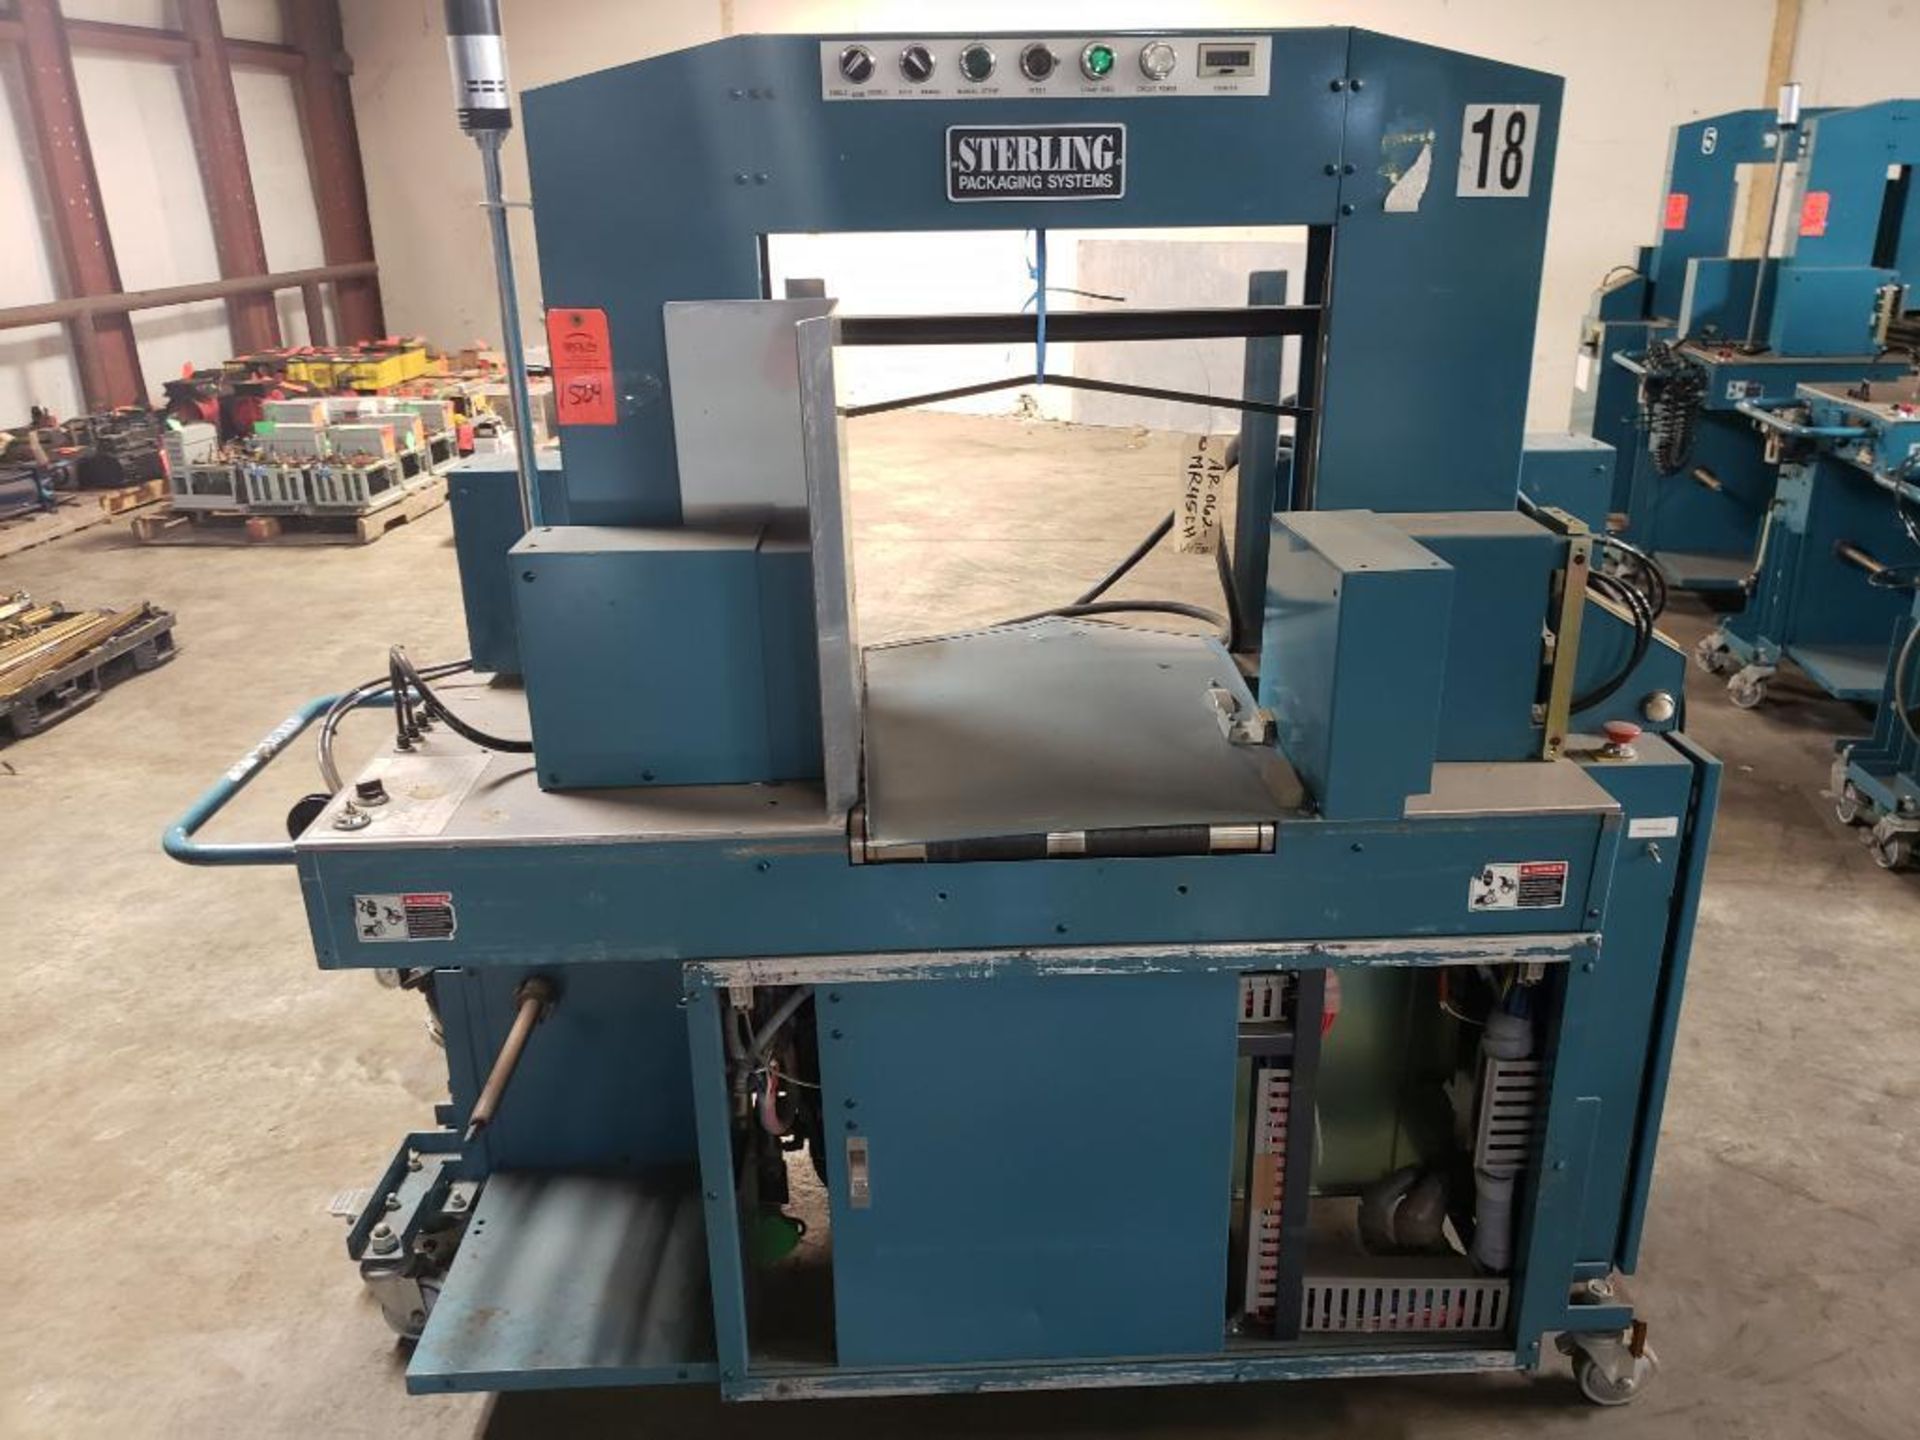 Sterling packaging systems automatic banding machine. Model MR45CH.